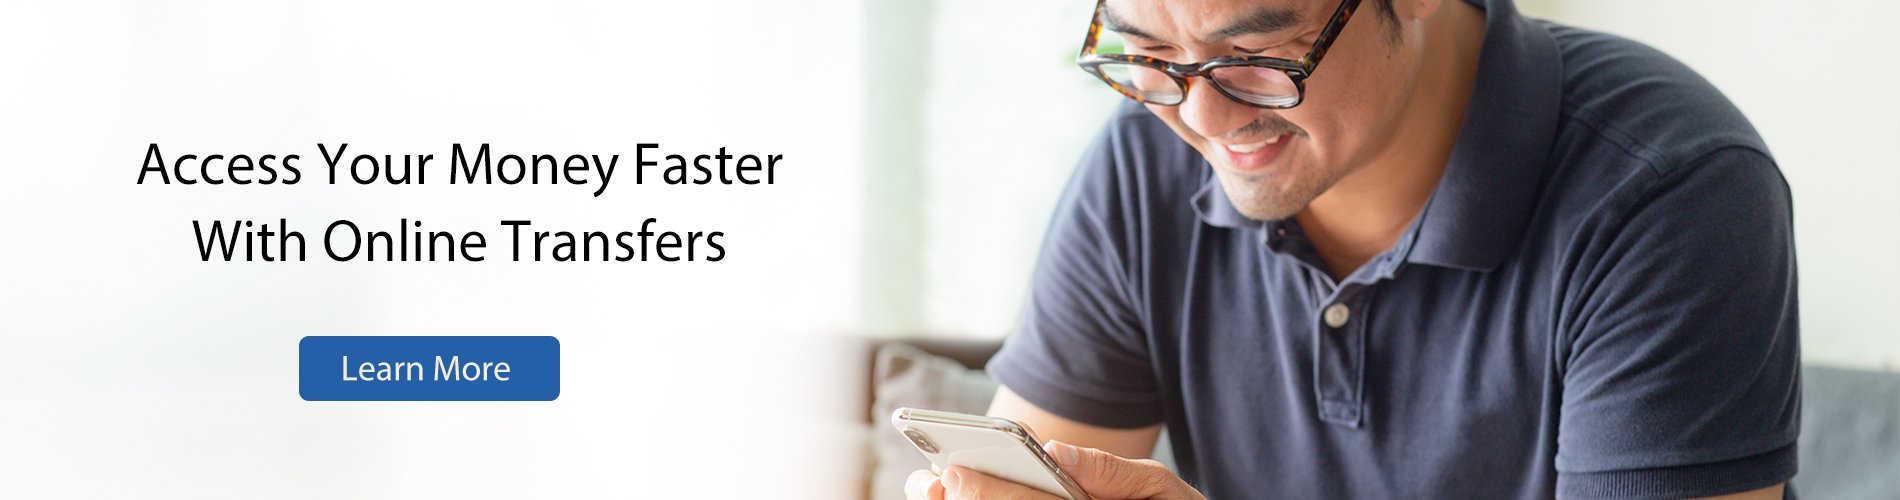 Access Your Money Faster with online banking.  Learn more.